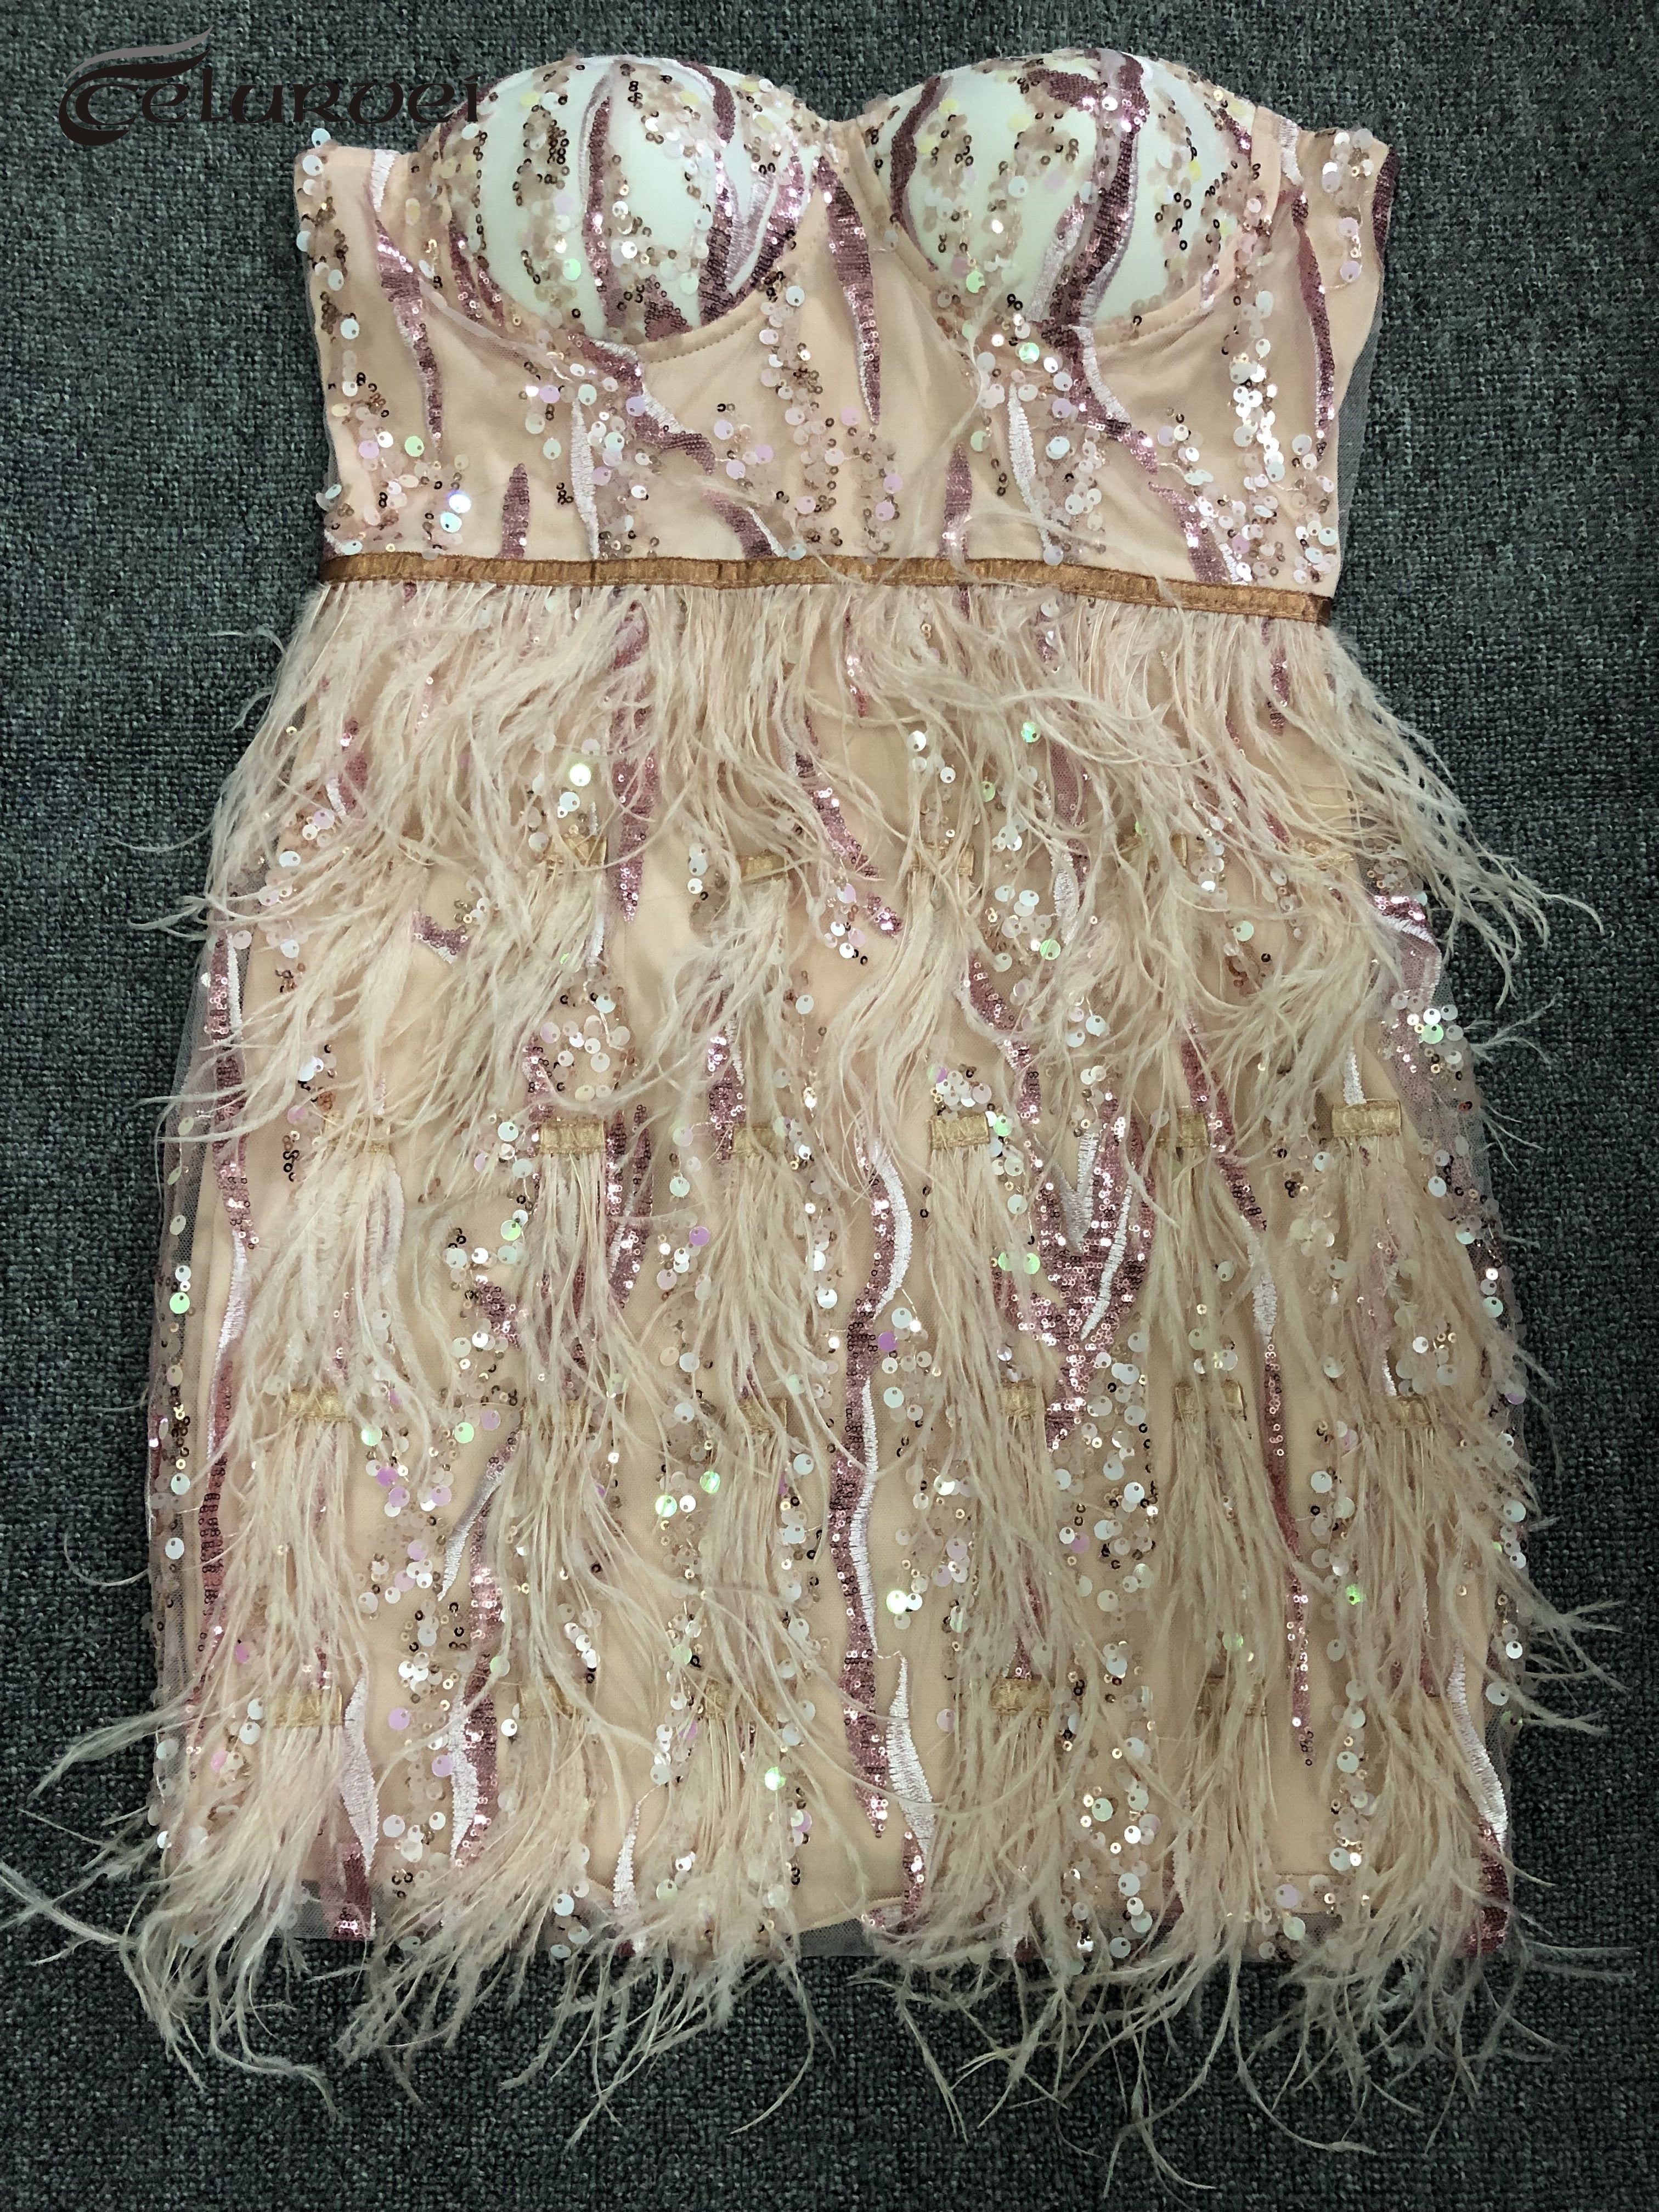 High Quality Pink Sequin Feather Mini Dress Fashion Strapless Night Club Party Bodycon Dress Vestidos